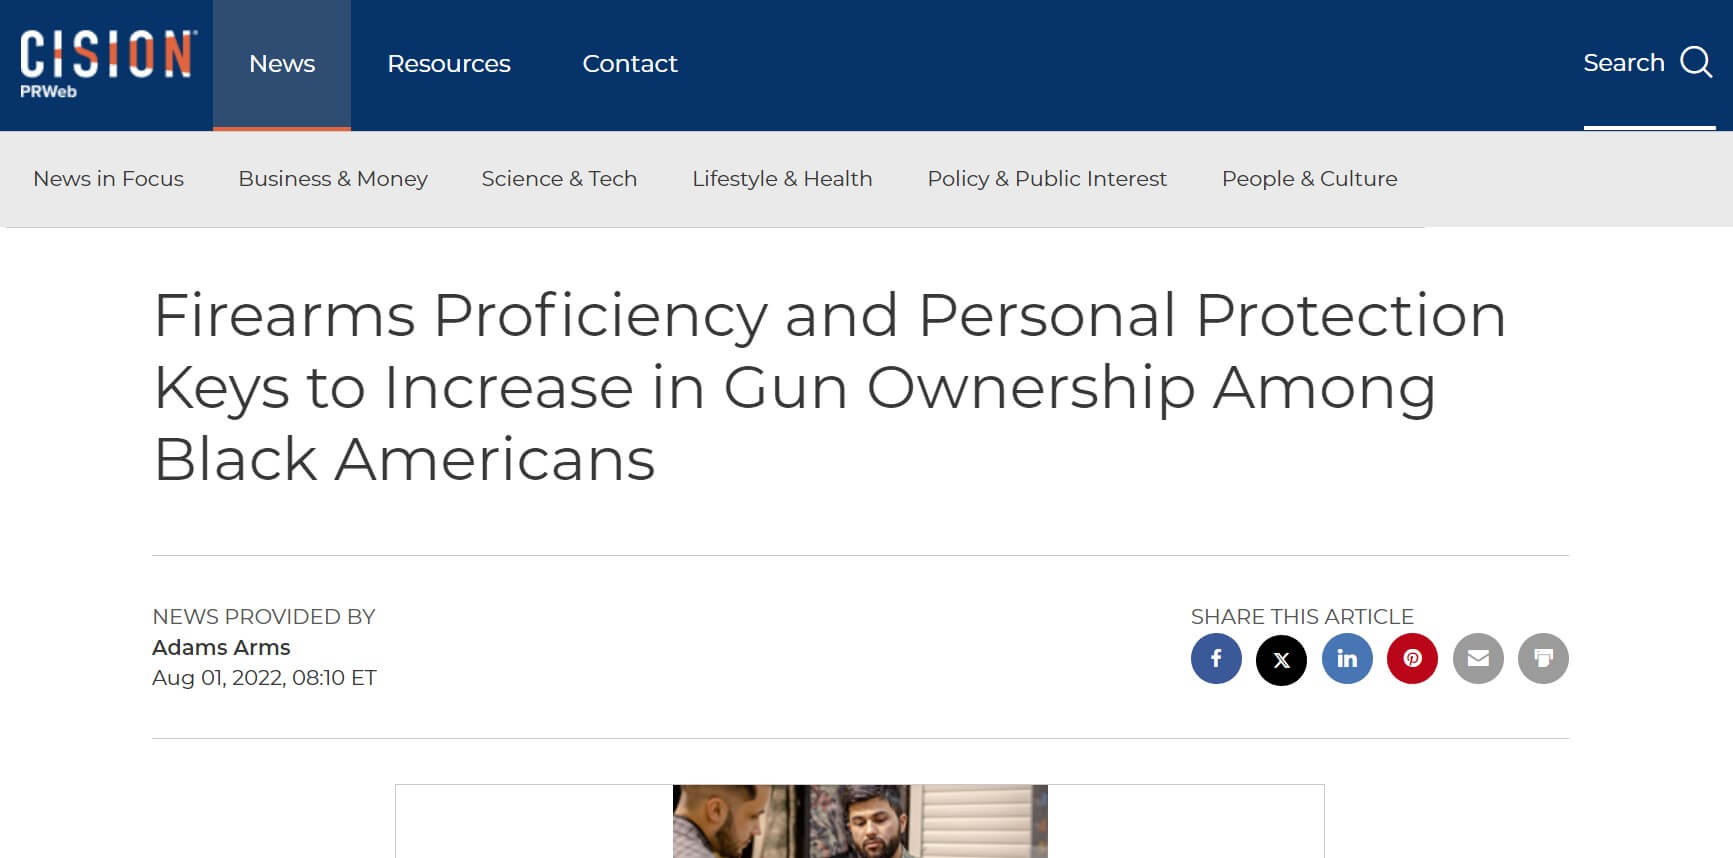 Cision News Article: Firearms Proficiency and Personal Protection keys to Increase in Gun Ownership Among Black Americans